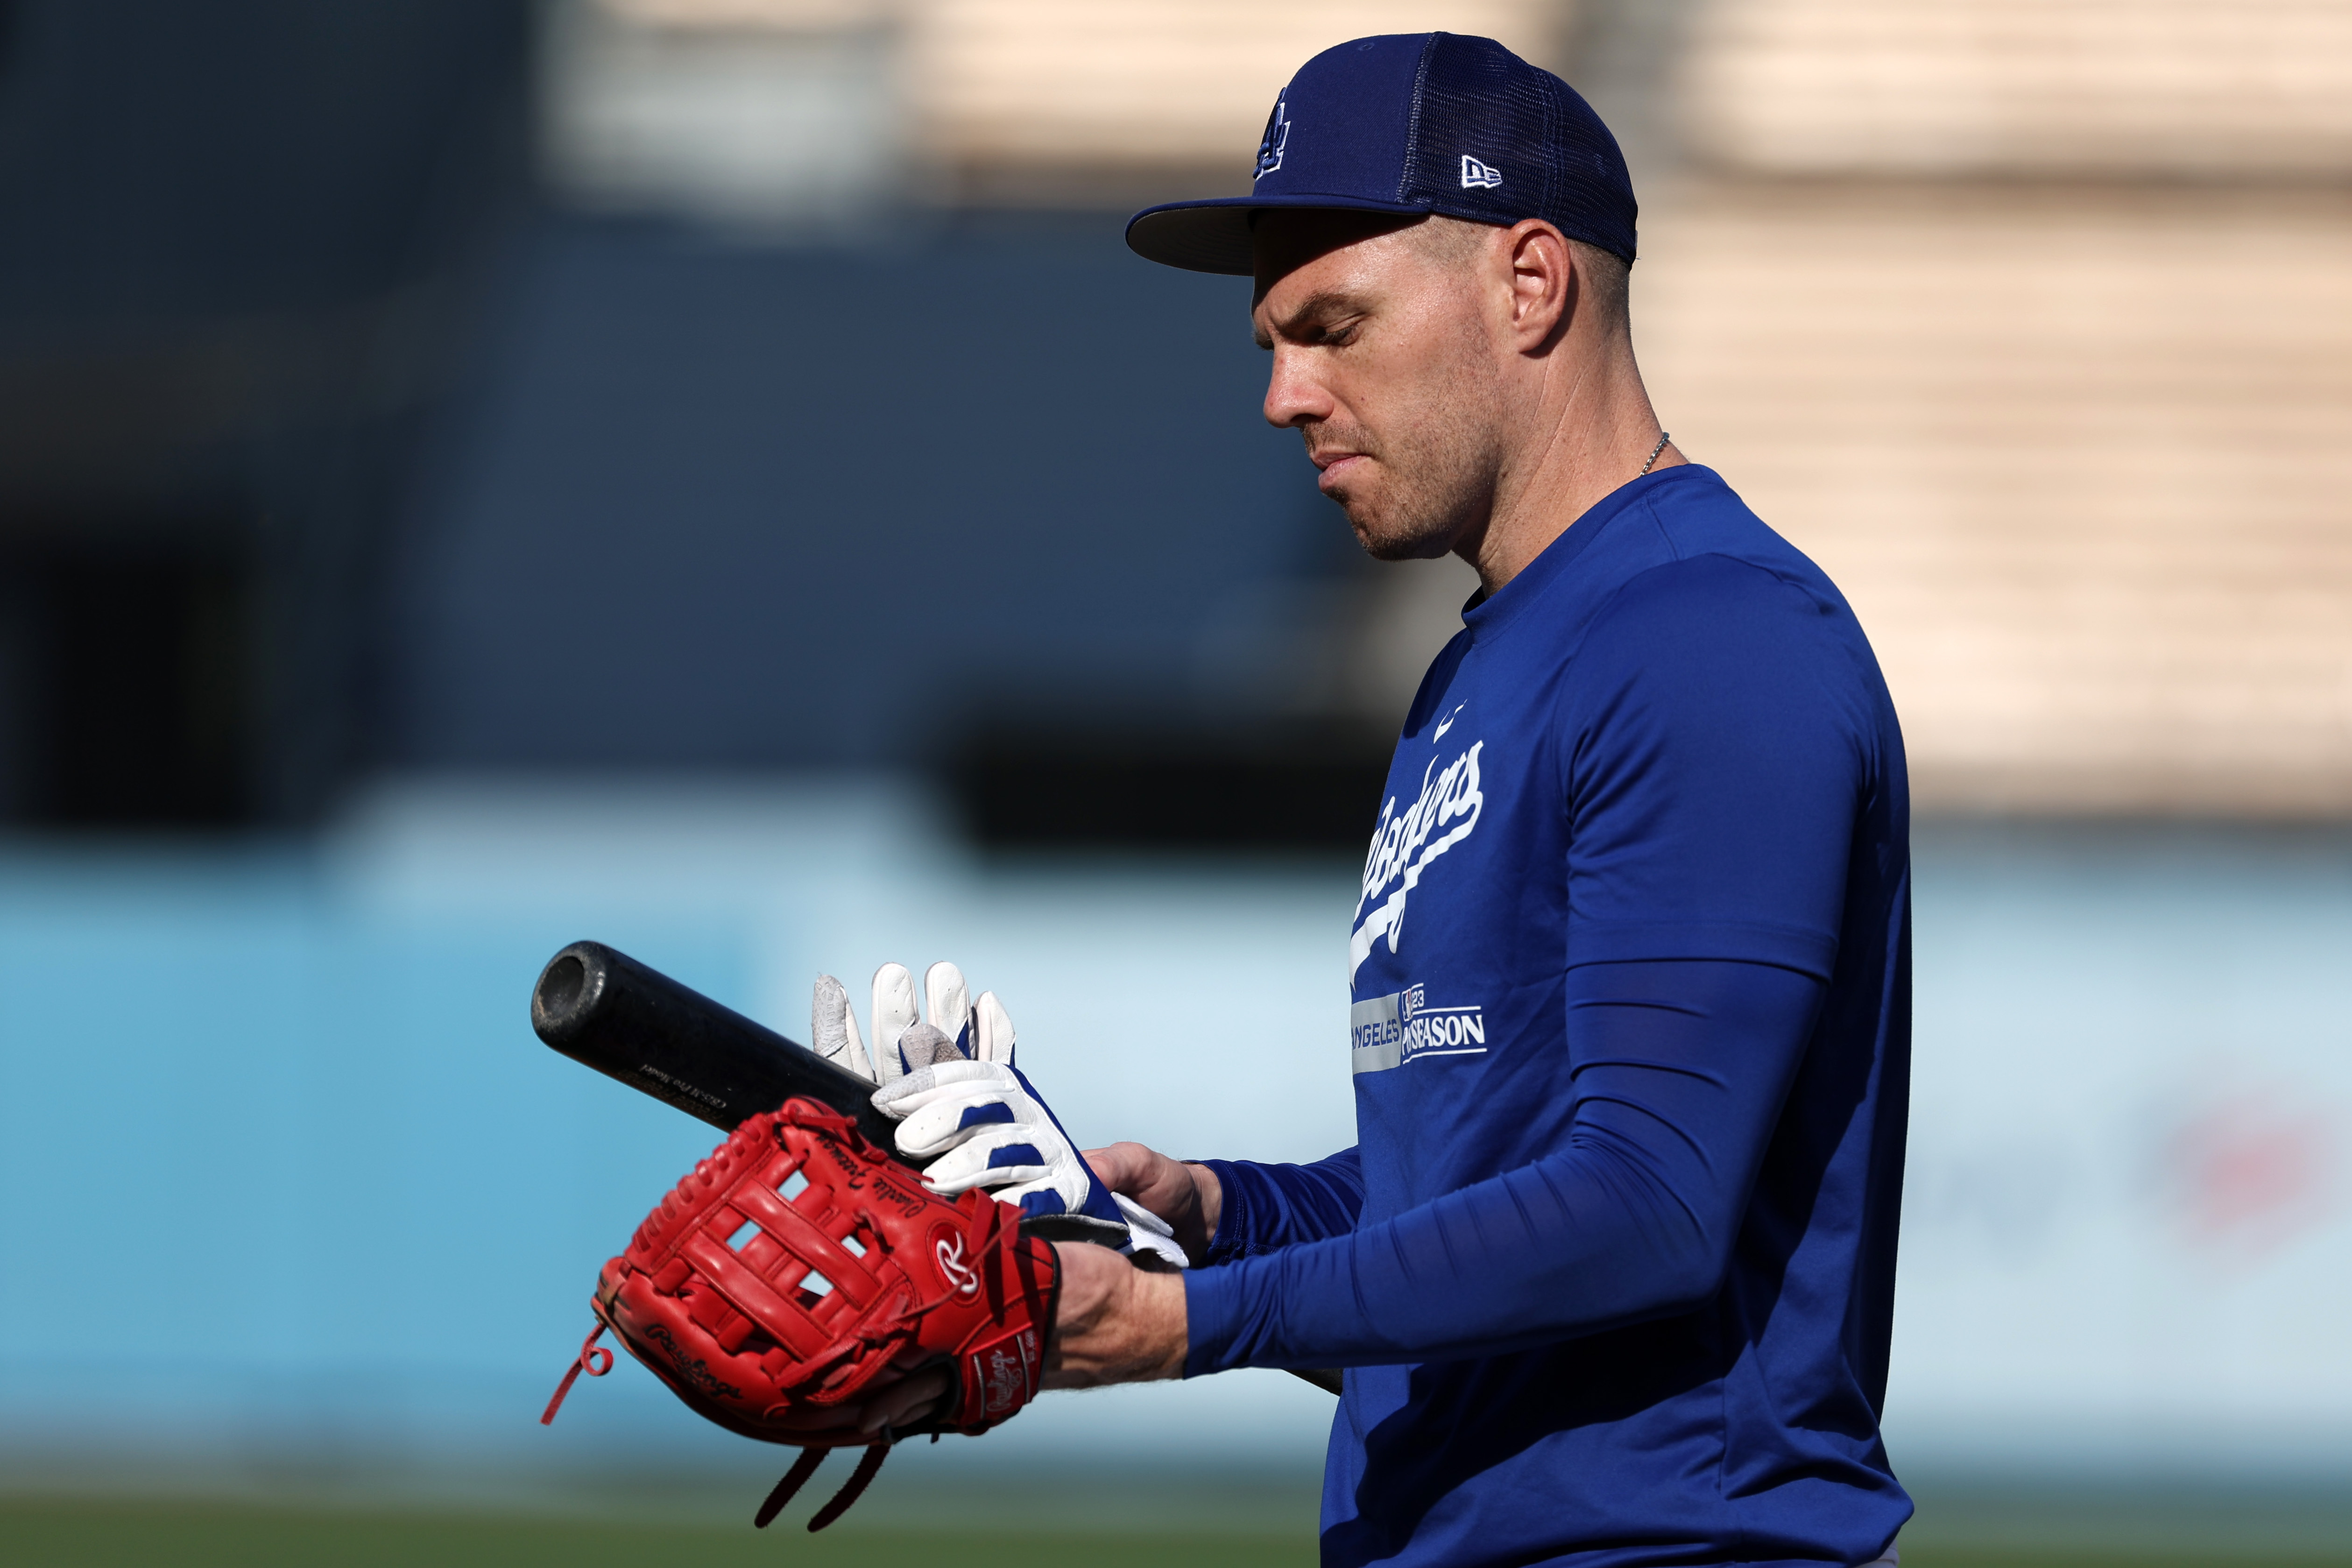 Freddie Freeman Happy to See Dodgers Not Just Relying on the Home